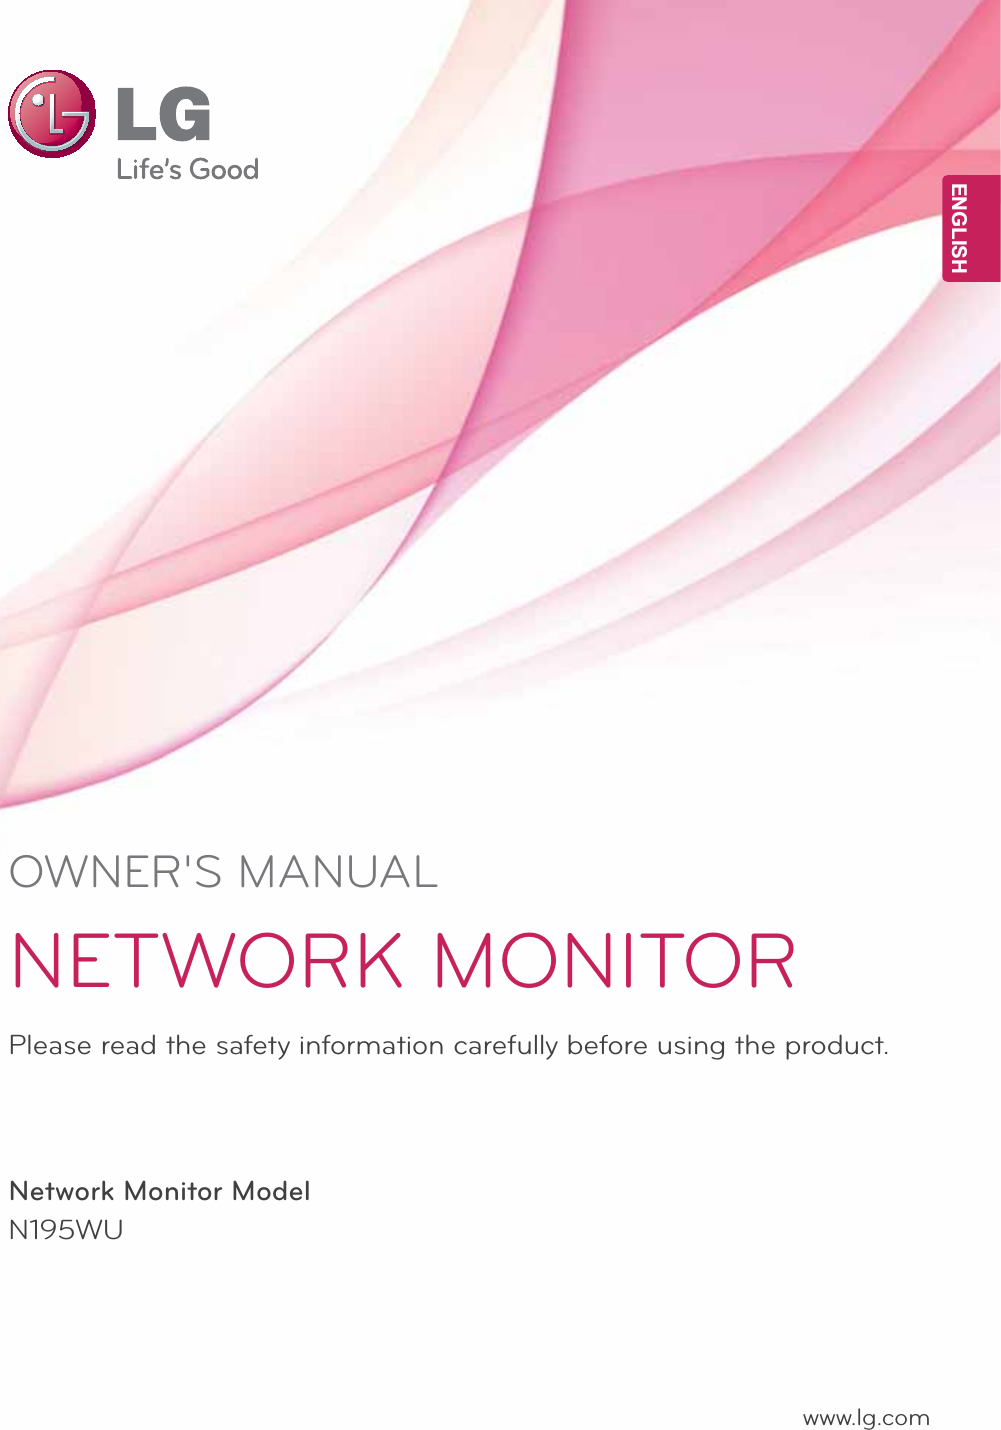 www.lg.comOWNER&apos;S MANUALNETWORK MONITORN195WUPlease read the safety information carefully before using the product.Network Monitor ModelENGLISH